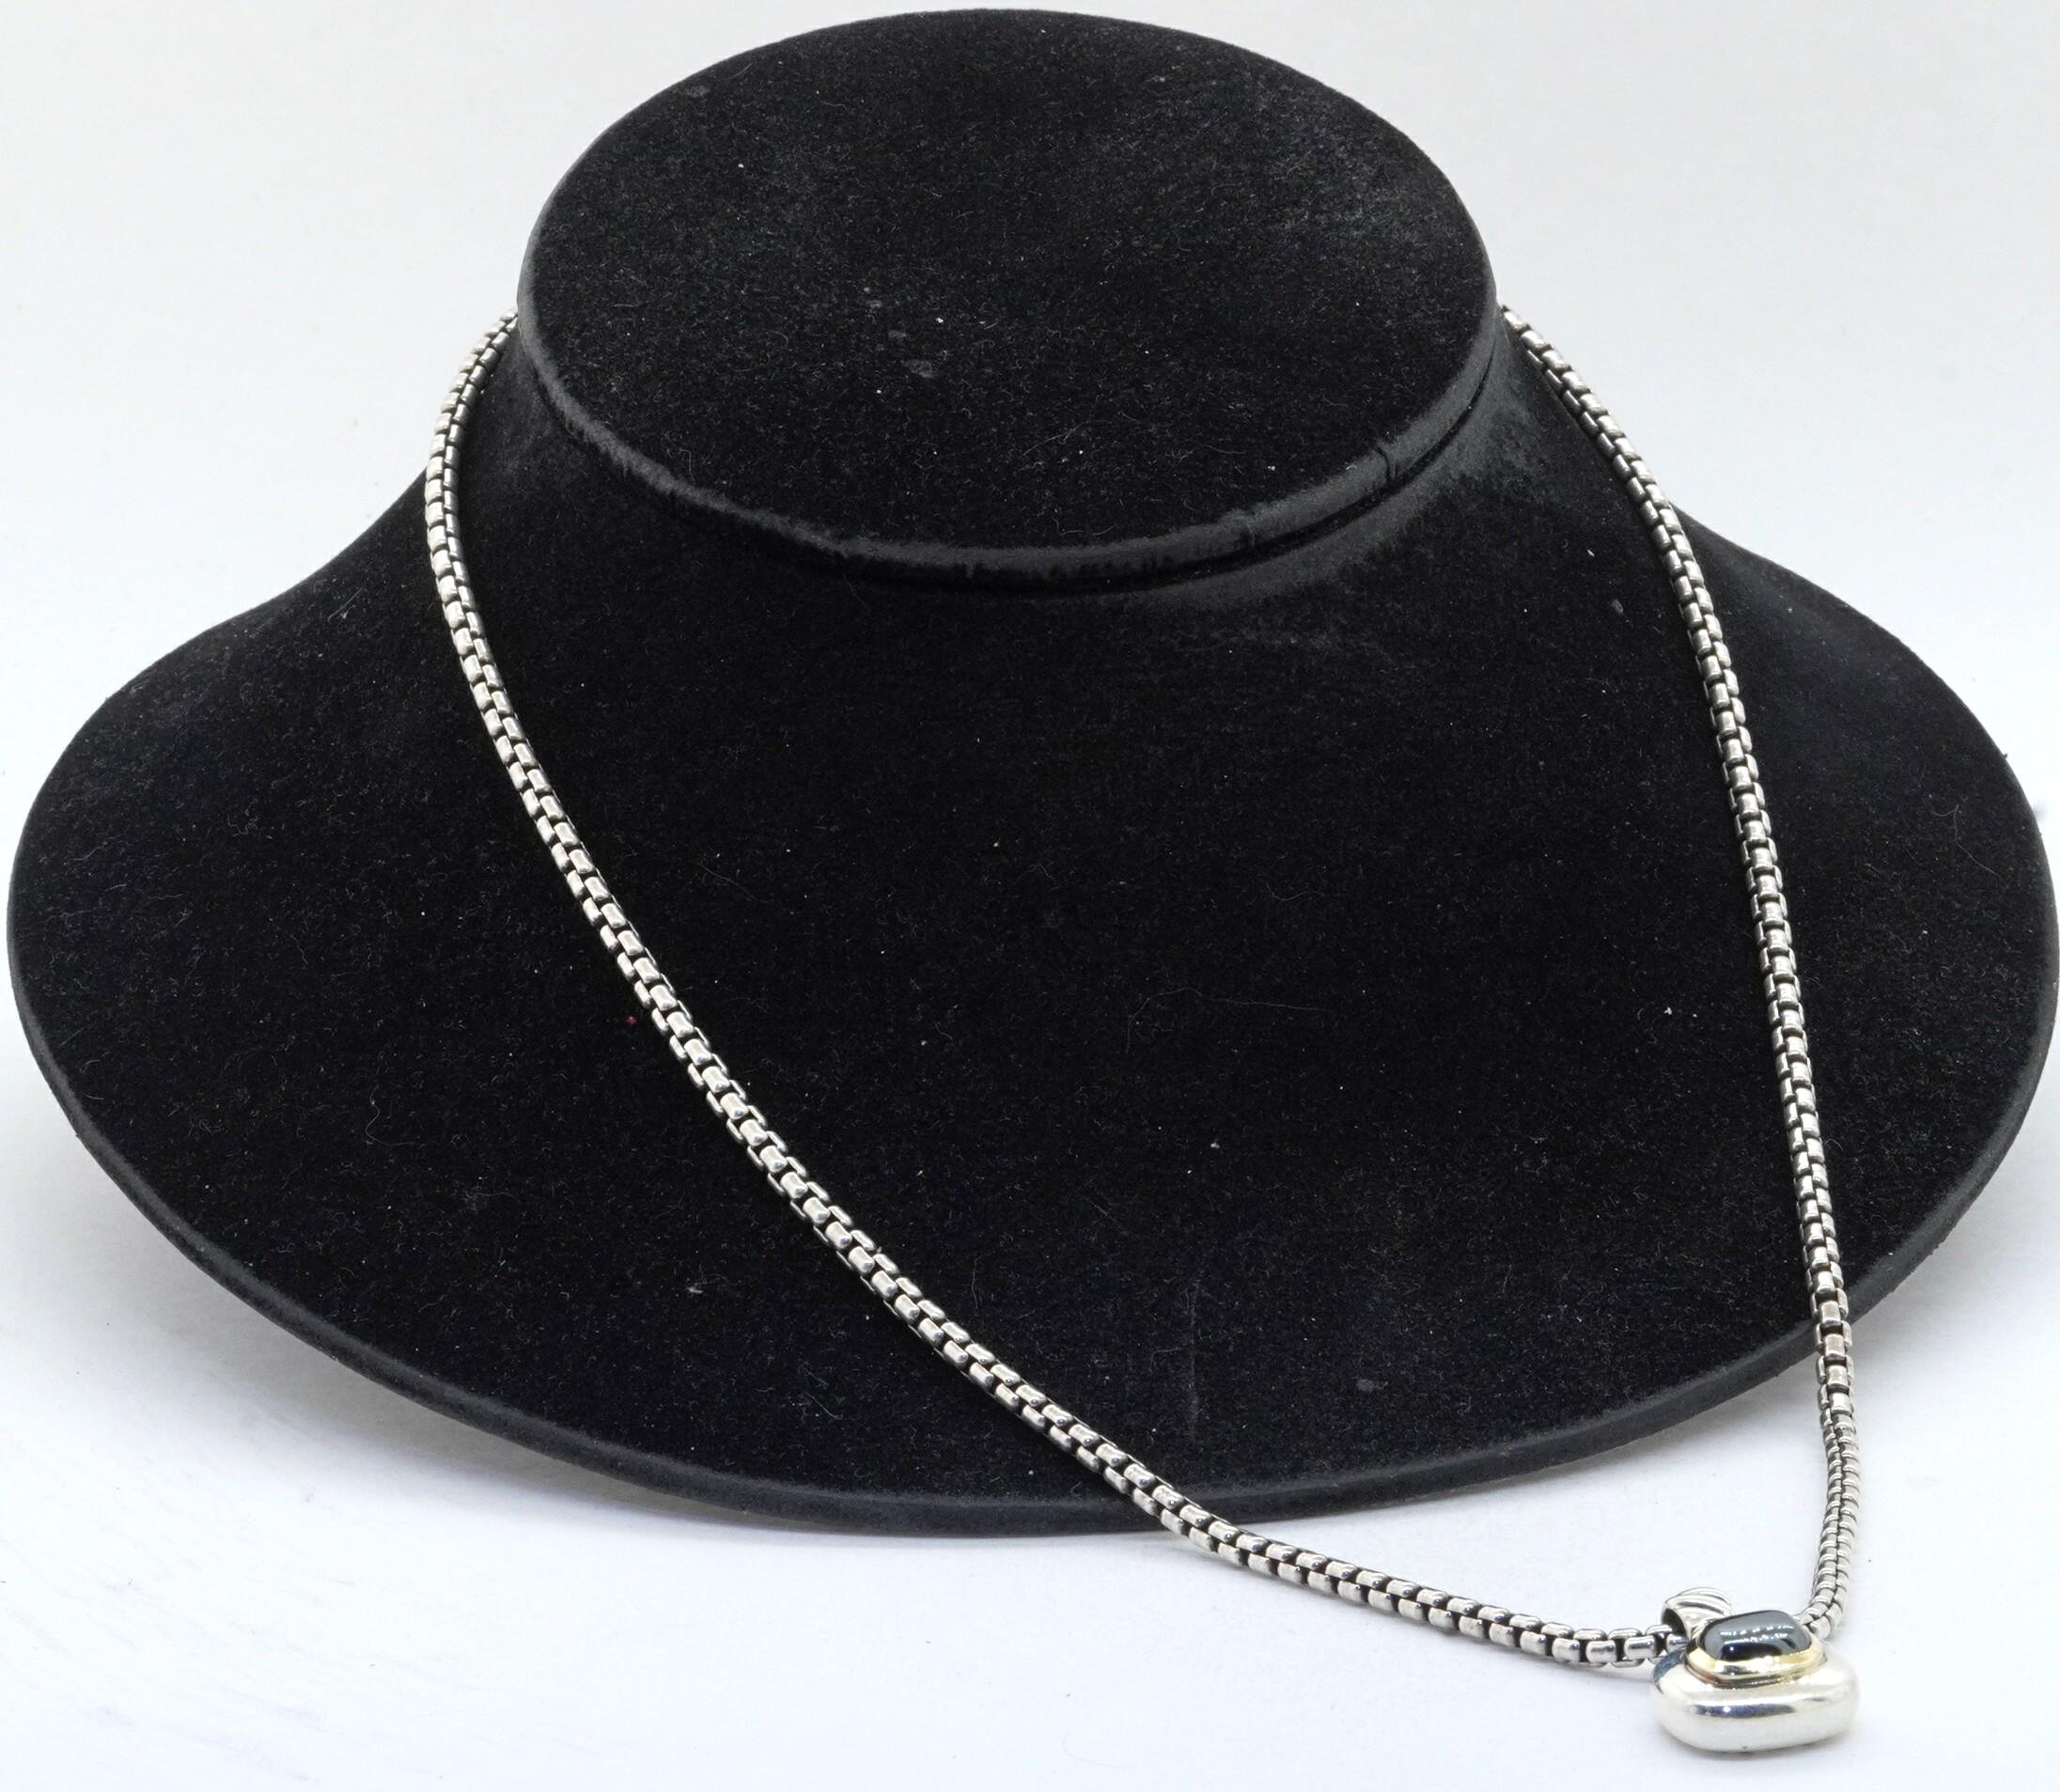 David Yurman 14K & 925 Sterling silver hematite pendant on chain necklace. This intriguing piece of jewelry is crafted in both gorgeous 14K yellow gold/925 Sterling silver and features a genuine approx. 9.4 x 7.2mm hematite. This Cabochon cut gem is